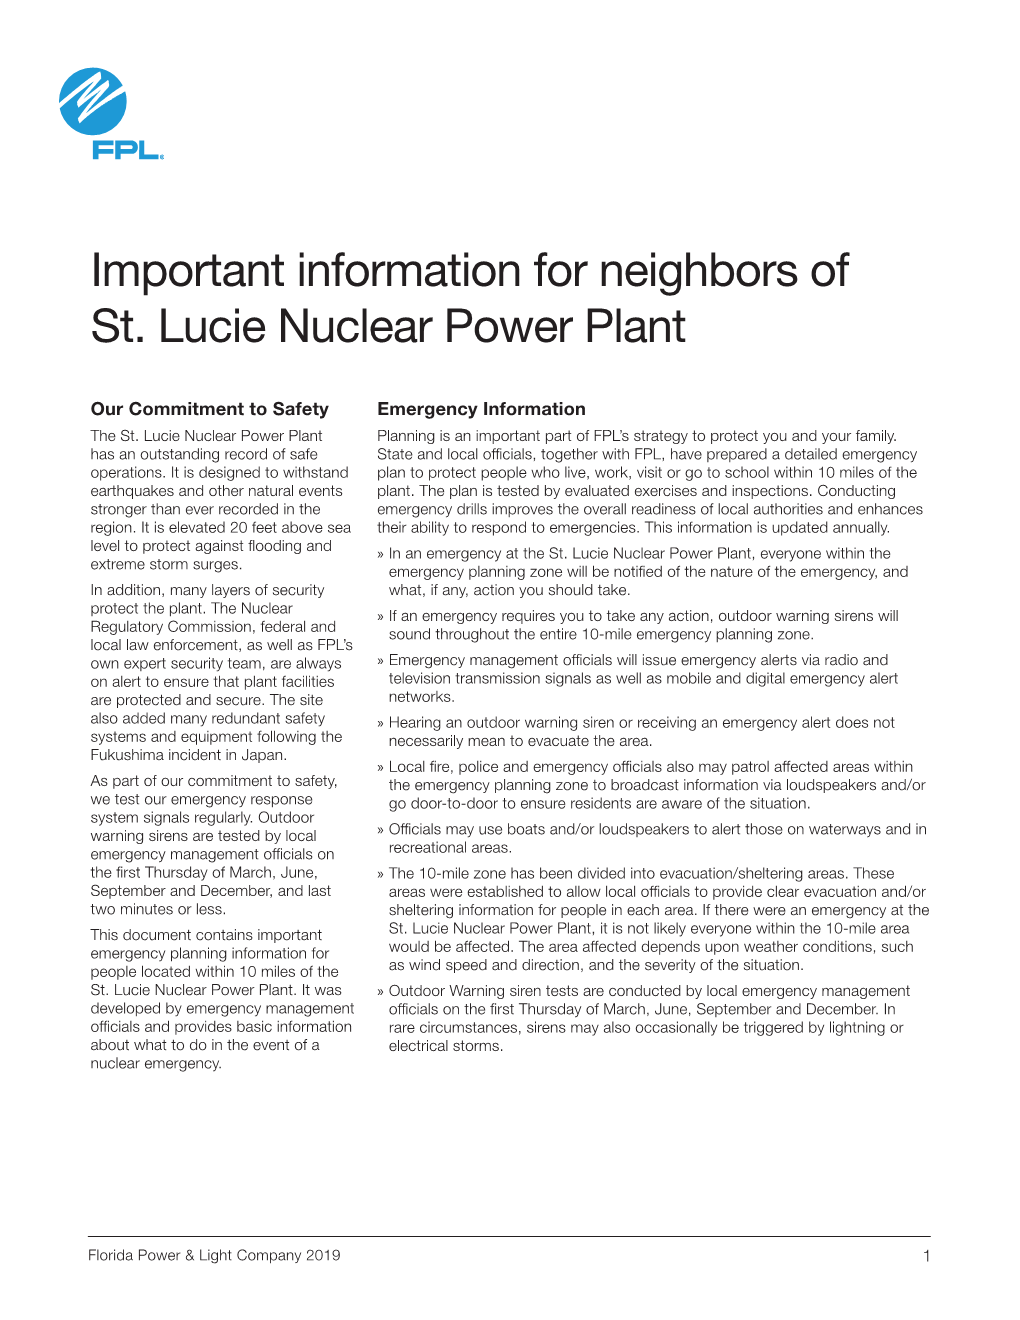 Important Information for Neighbors of St. Lucie Nuclear Power Plant